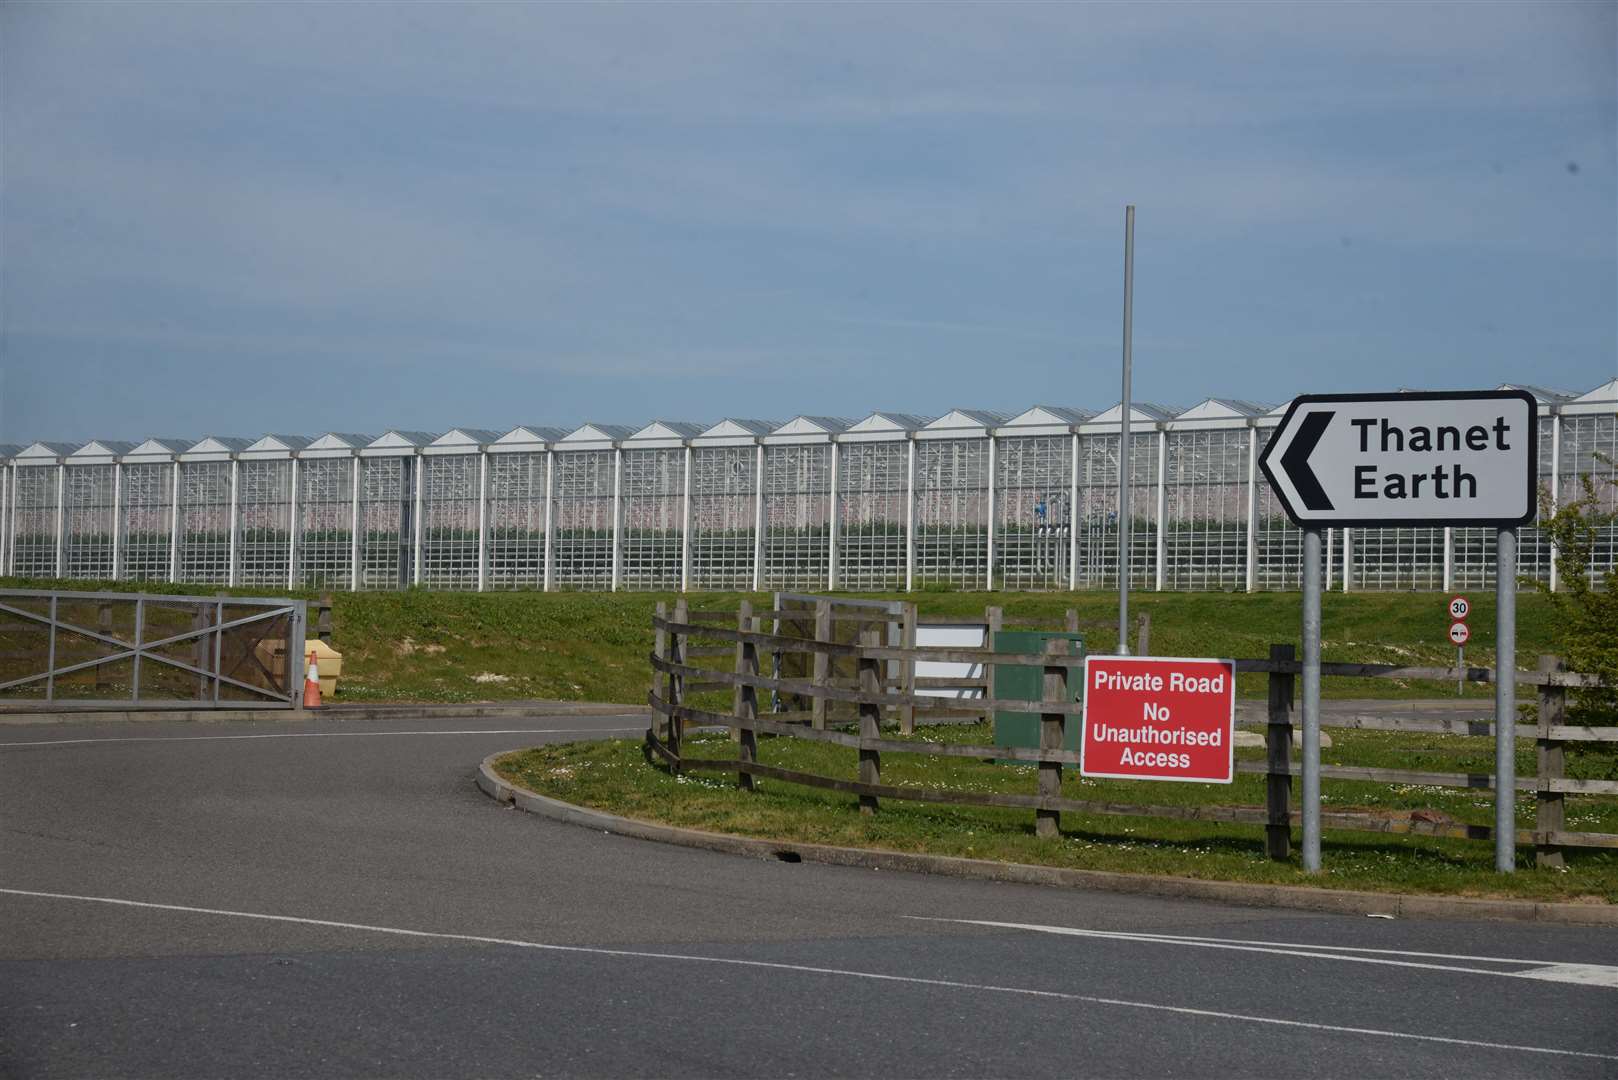 Greenhouses at Thanet Earth